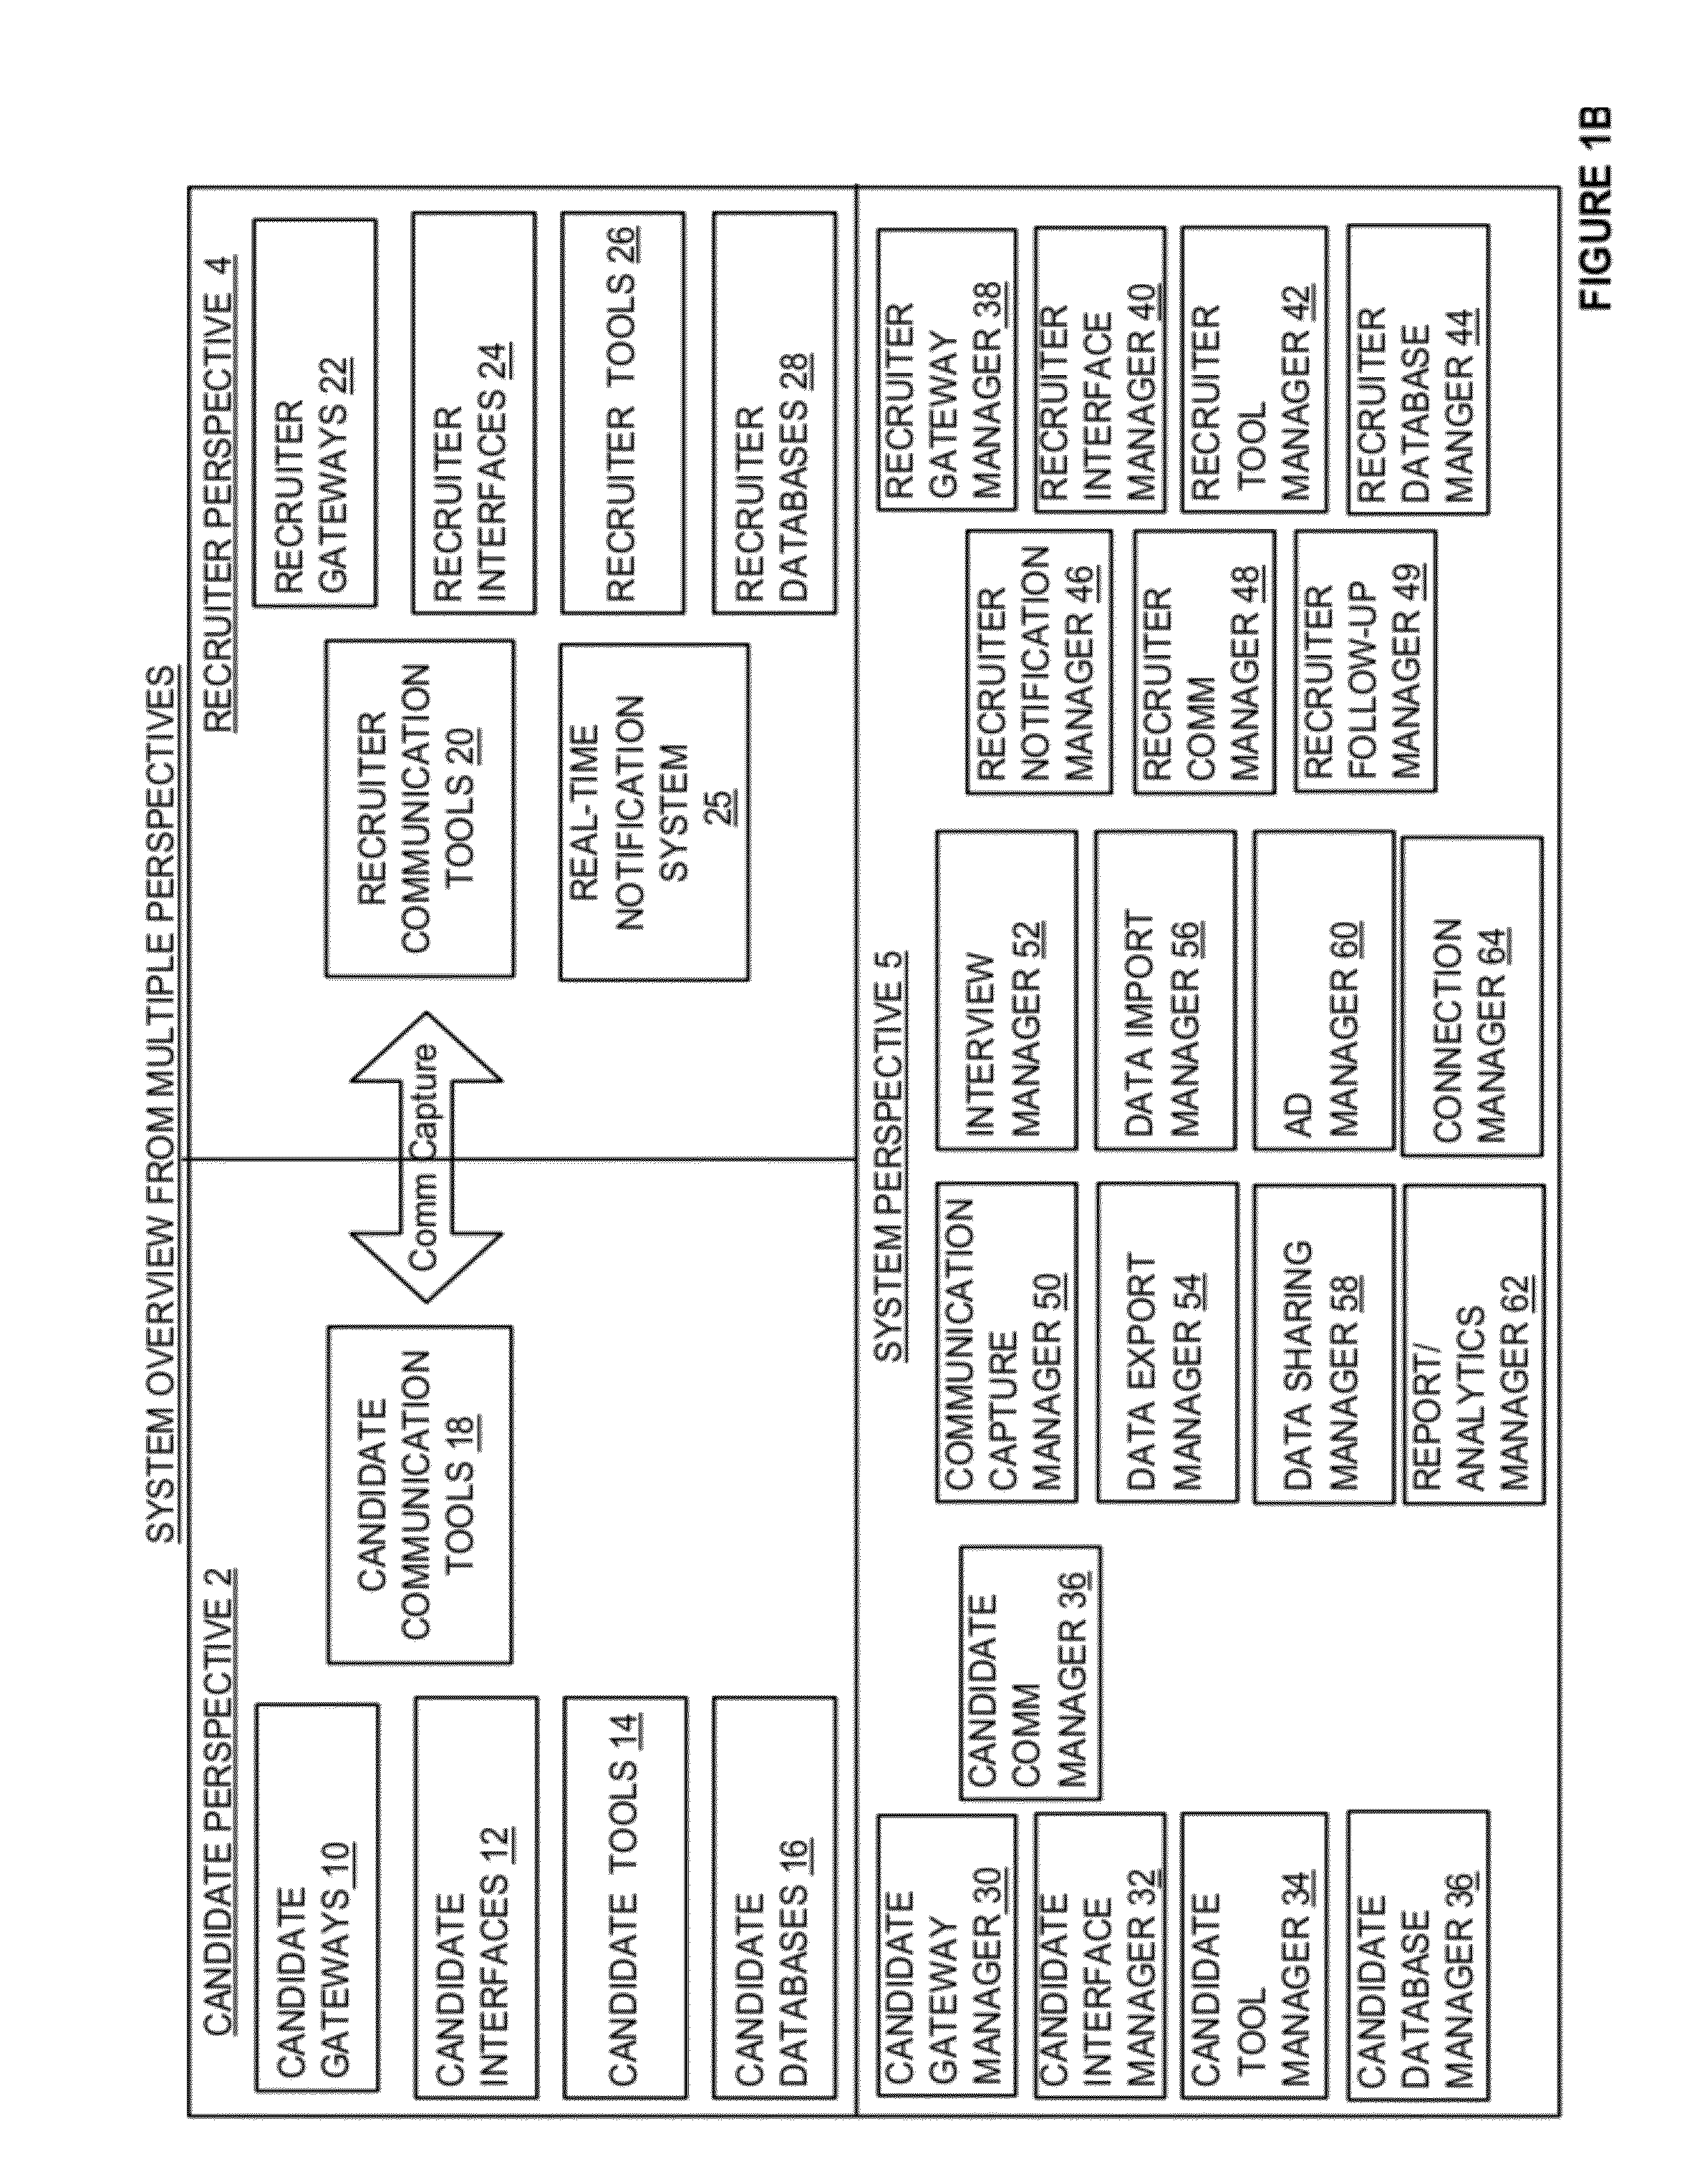 Method and apparatus for managing and capturing communications in a recruiting environment